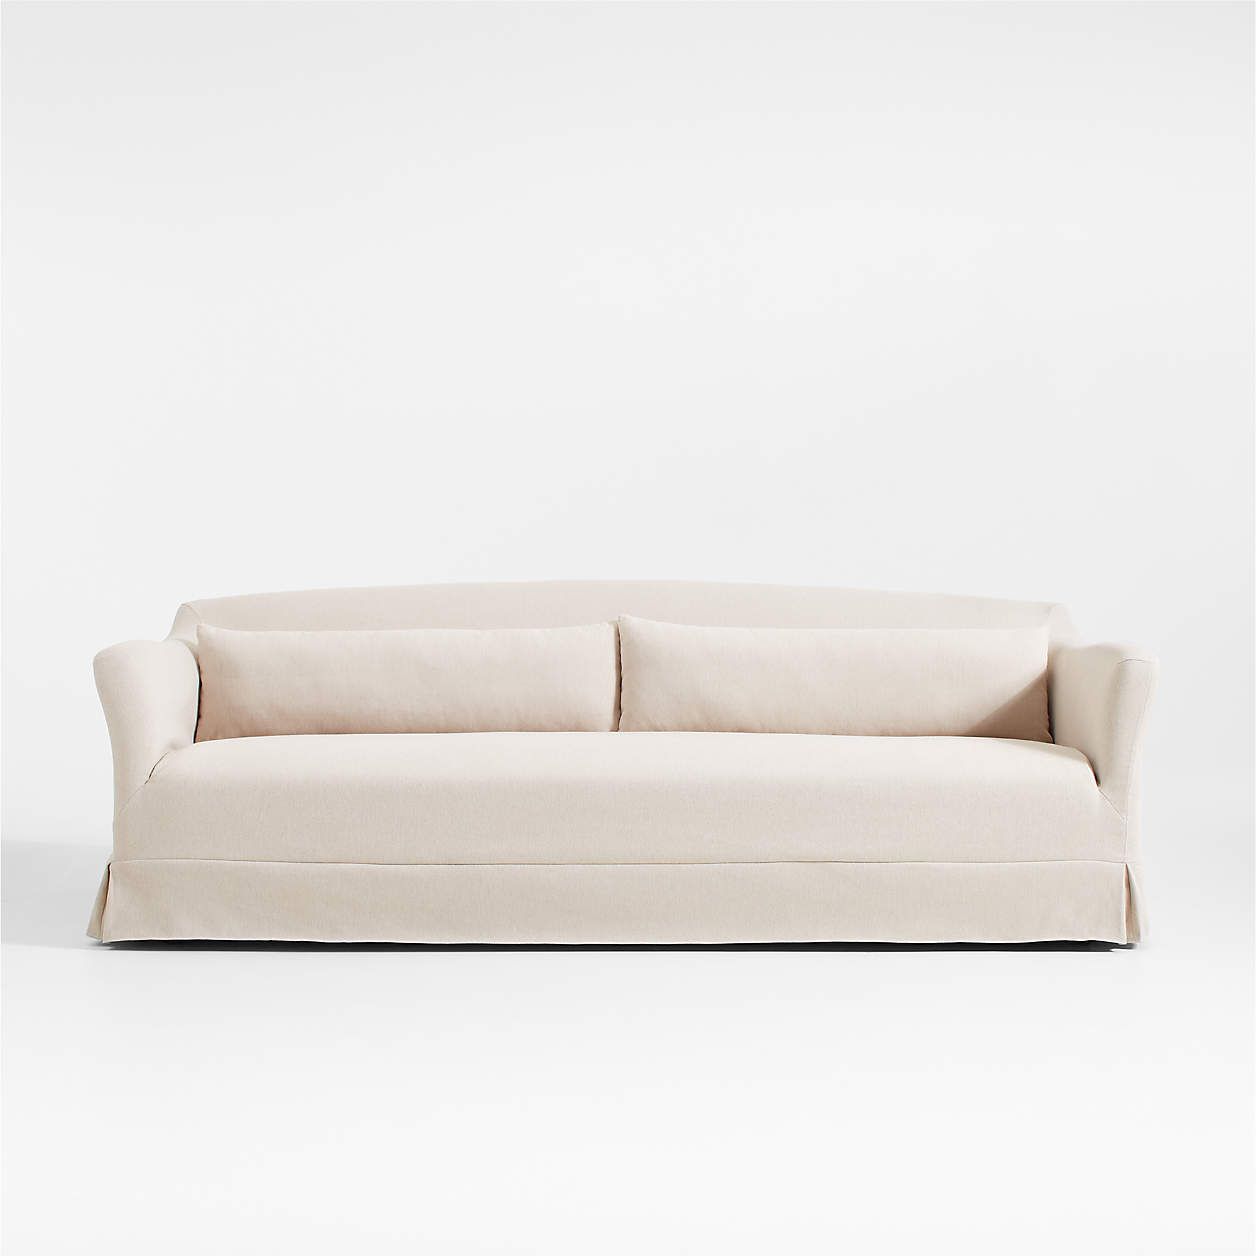 Crawford 90" Slipcovered Sofa by Jake Arnold | Crate & Barrel | Crate & Barrel